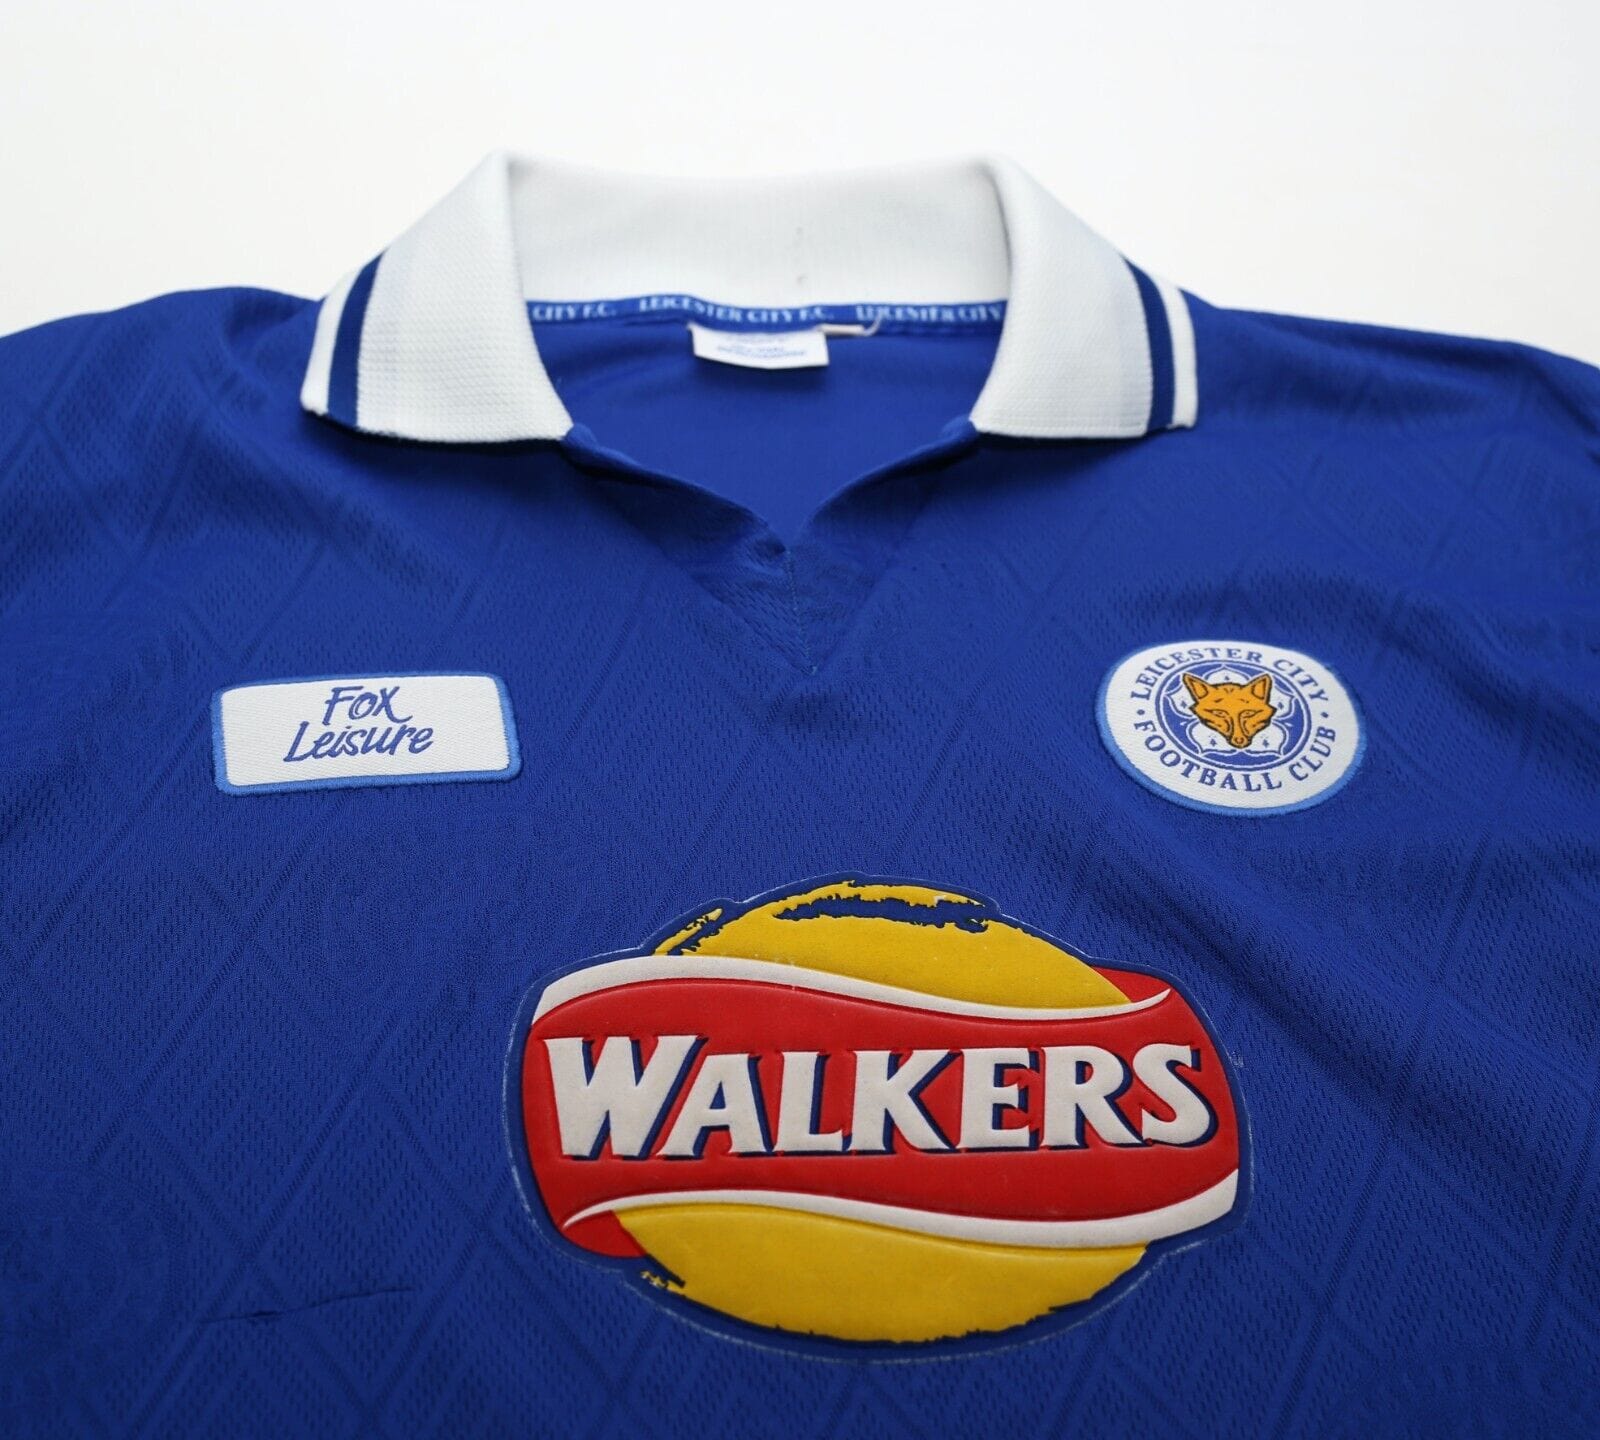 Men's 1996/98 Leicester City Fox Leisure Goalkeeper Jersey Size XL (46-48)  NWOT - Helia Beer Co